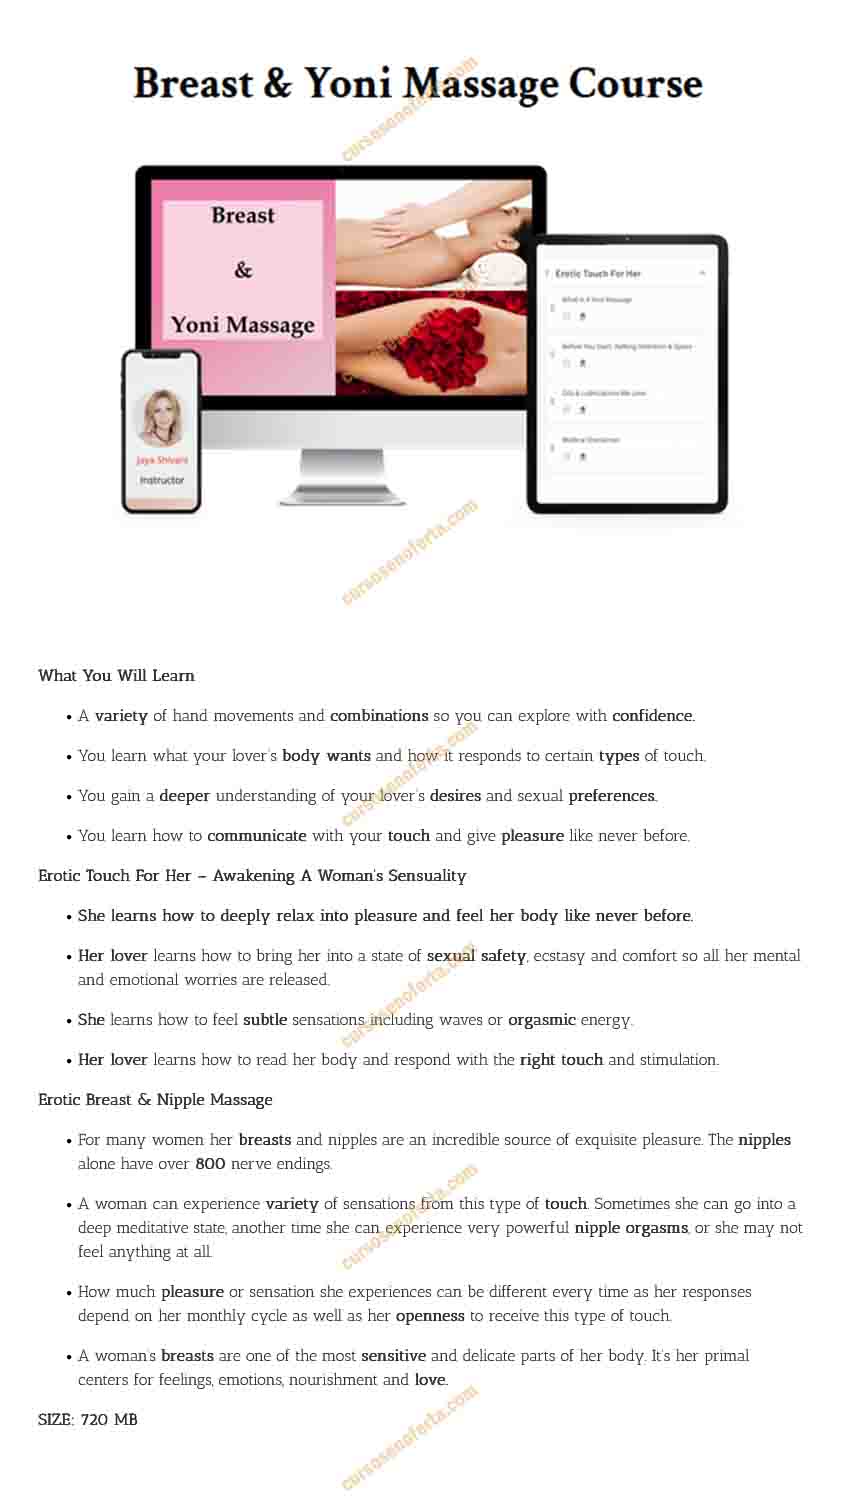 Breast and Yoni Massage Course